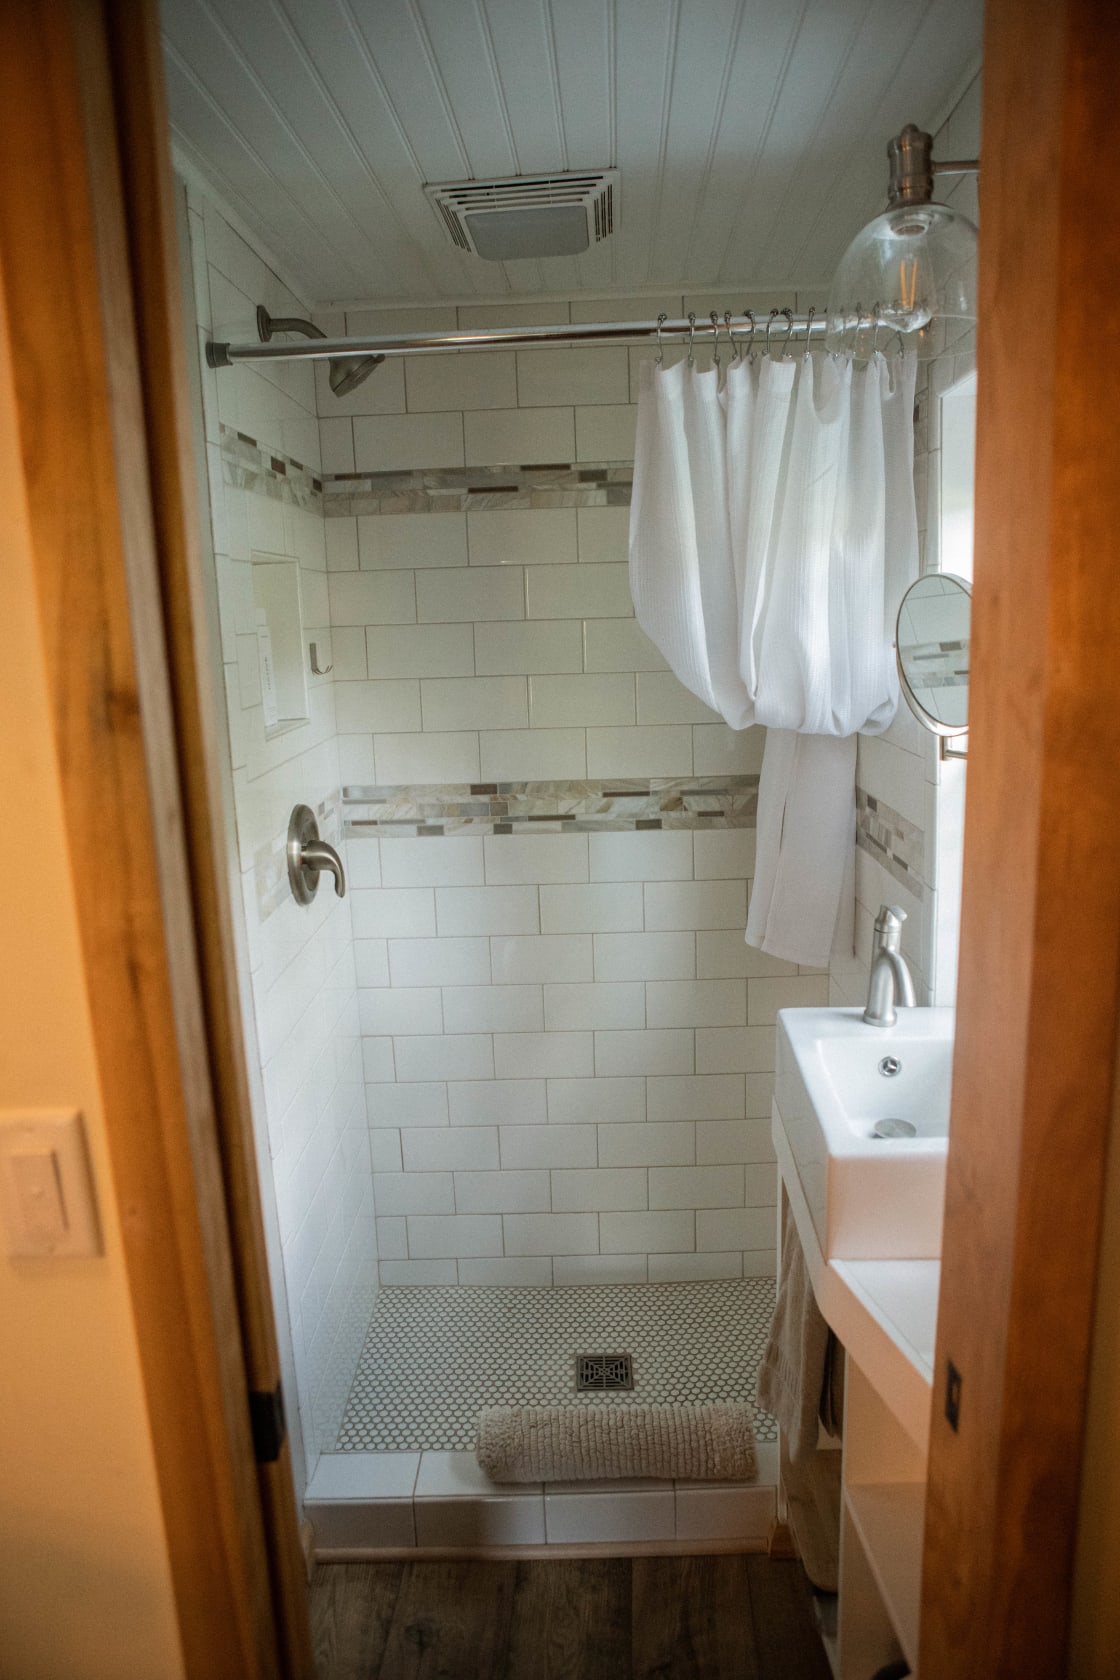 Right inside the front door there is a bathroom equipped with a high quality shower!